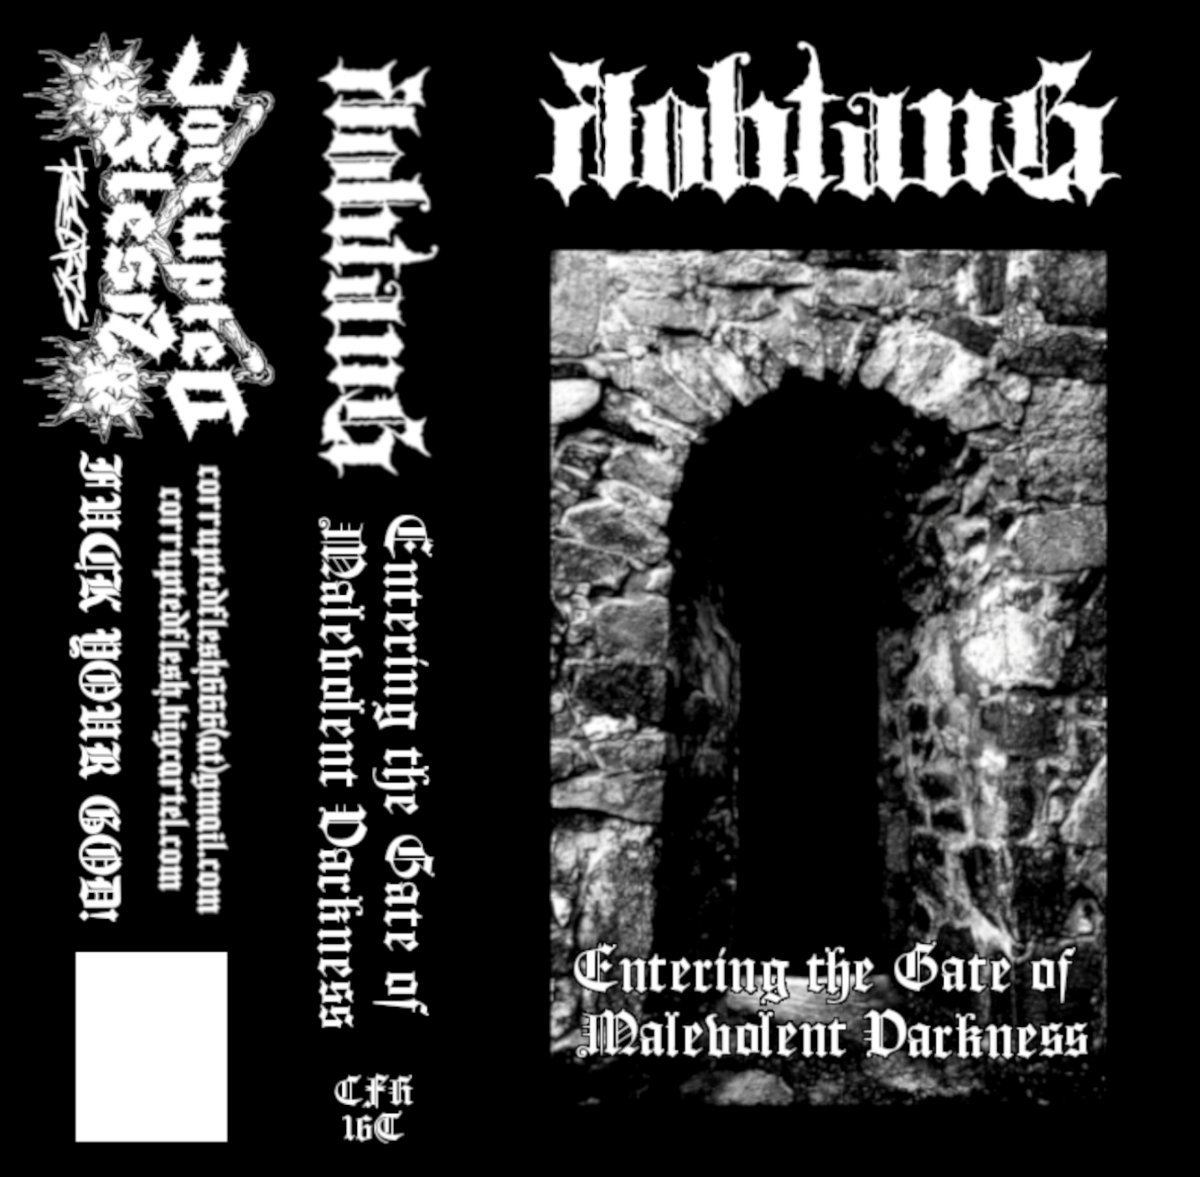 rohtang – entering the gate of malevolent darkness [ep]